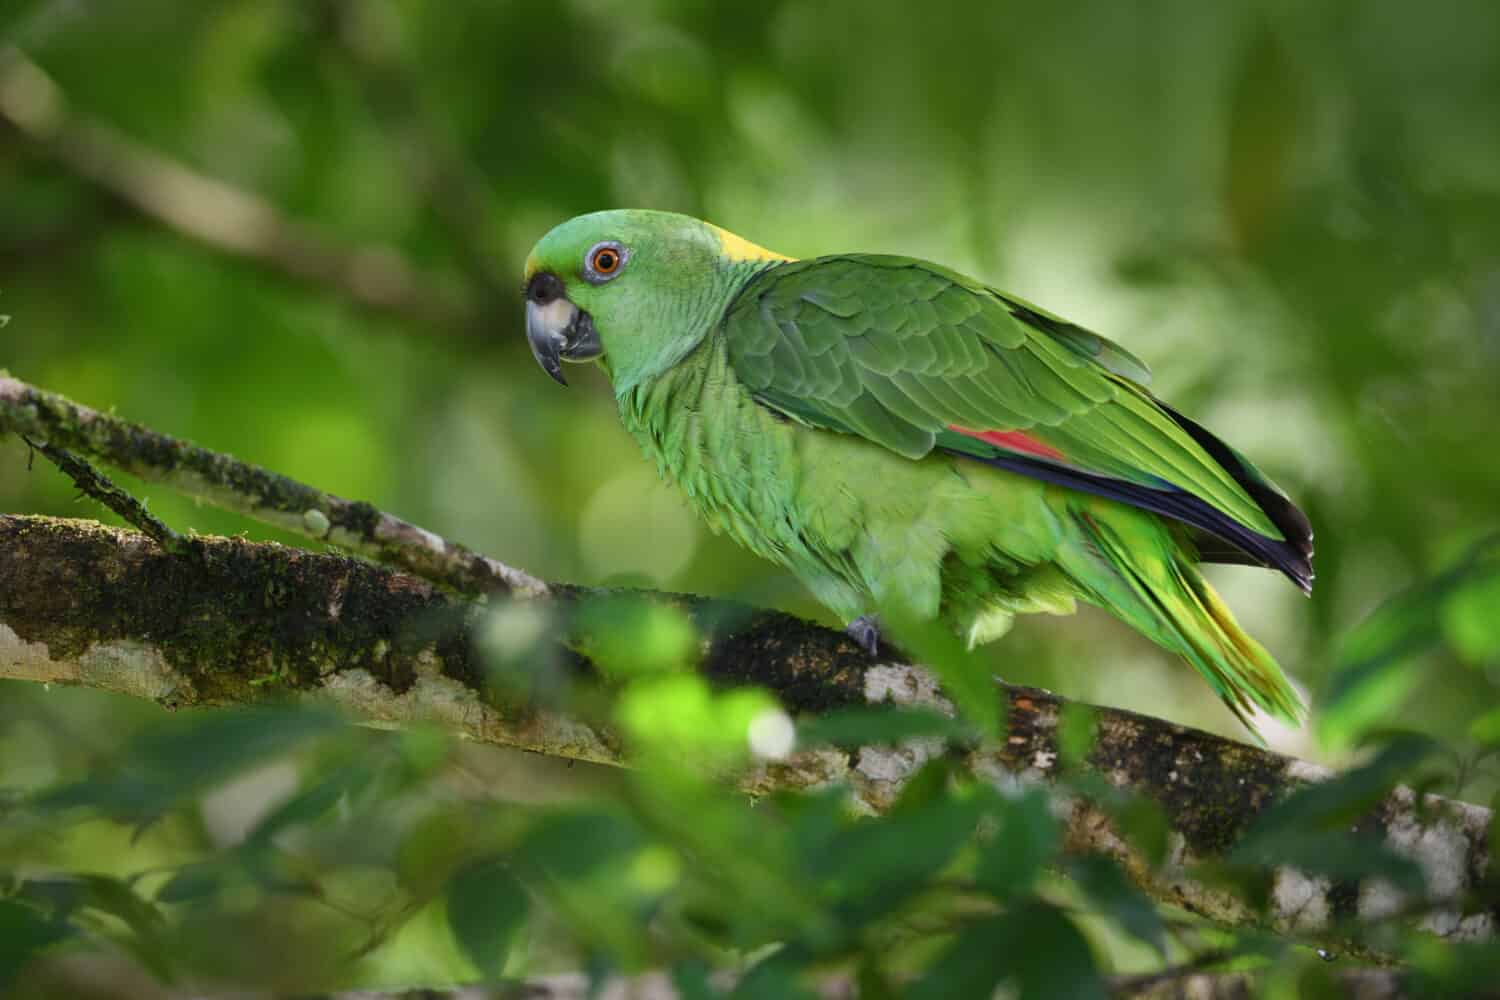 Yellow-naped amazon parrot perched on tree